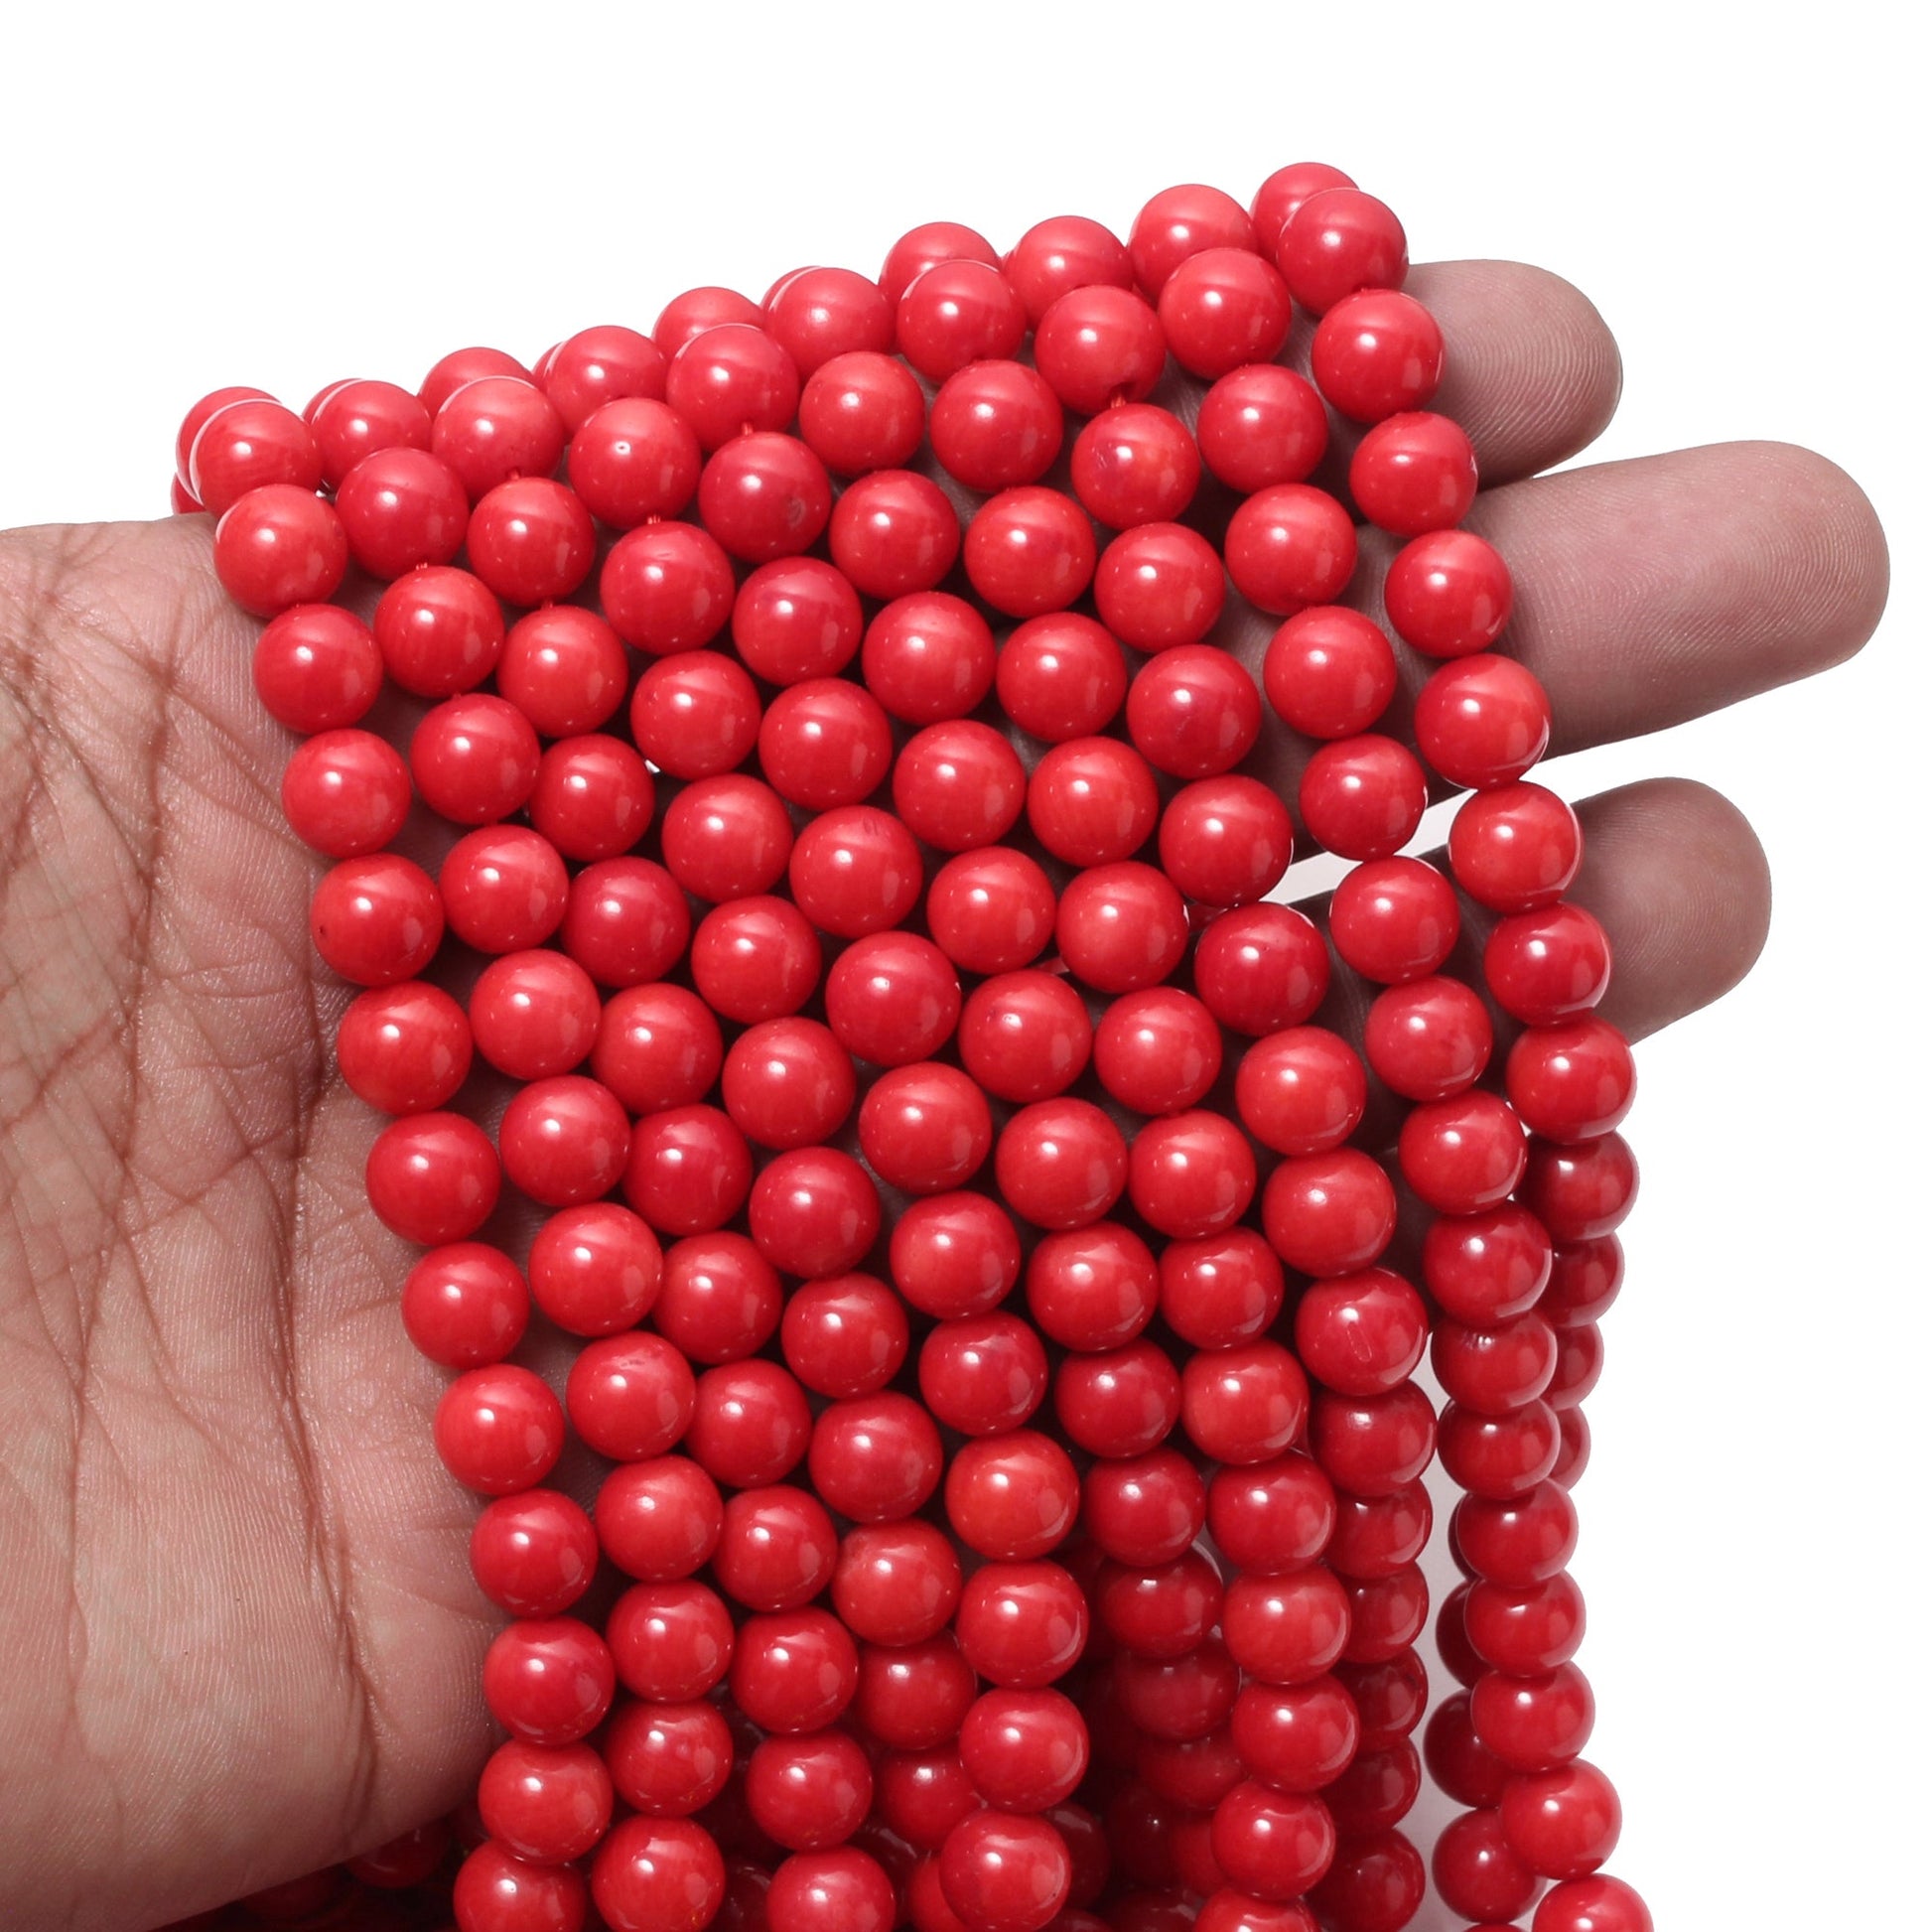 Red Coral Round Smooth Beads 8 mm, Bracelet Making Loose Beads Strand 16 Inches GemsRush